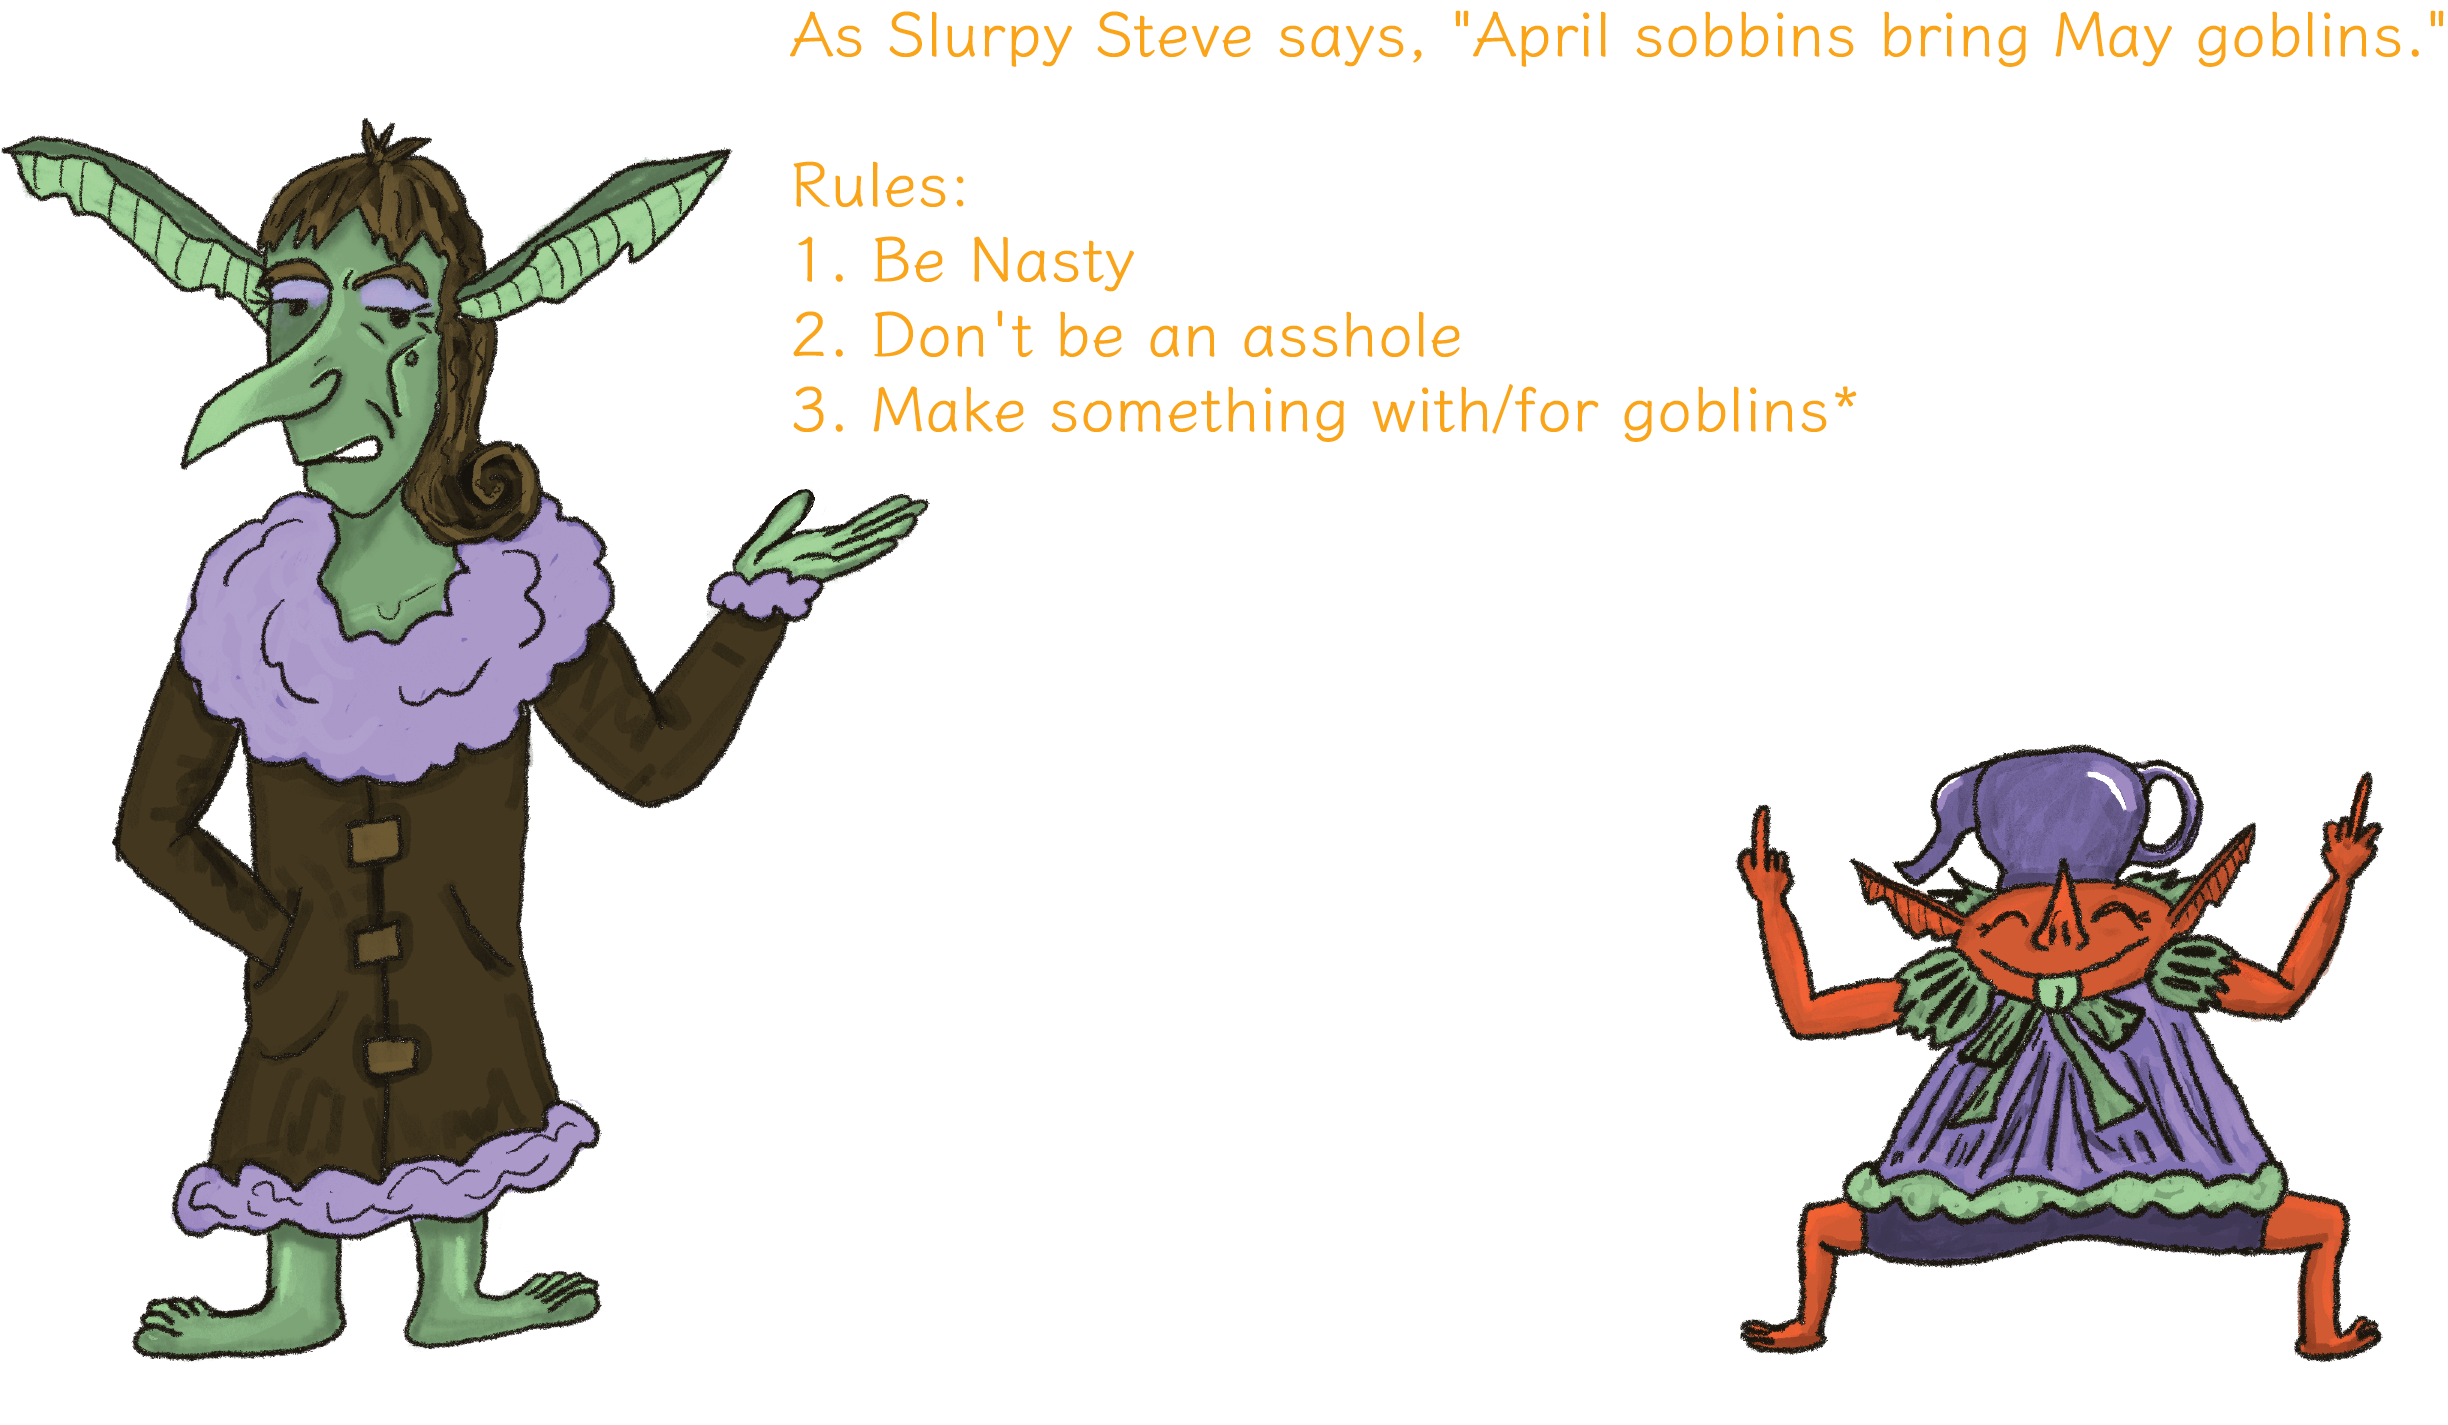 text reading As Slutpy Steve says, 'April sobbins bring May goblins.' Let's write some games for and about goblins. Plus two more goblins: Oliv (kind, shiny & obscene), and Bulgranglia Pimple (severe, glamorous and mean). Then rules: 1. Be Nasty 2. Don't be an asshole 3. Make something with/for goblins (can include other nasty little guys such as imps, grinks, kobolds, gremlins, metaphorical goblins etc.